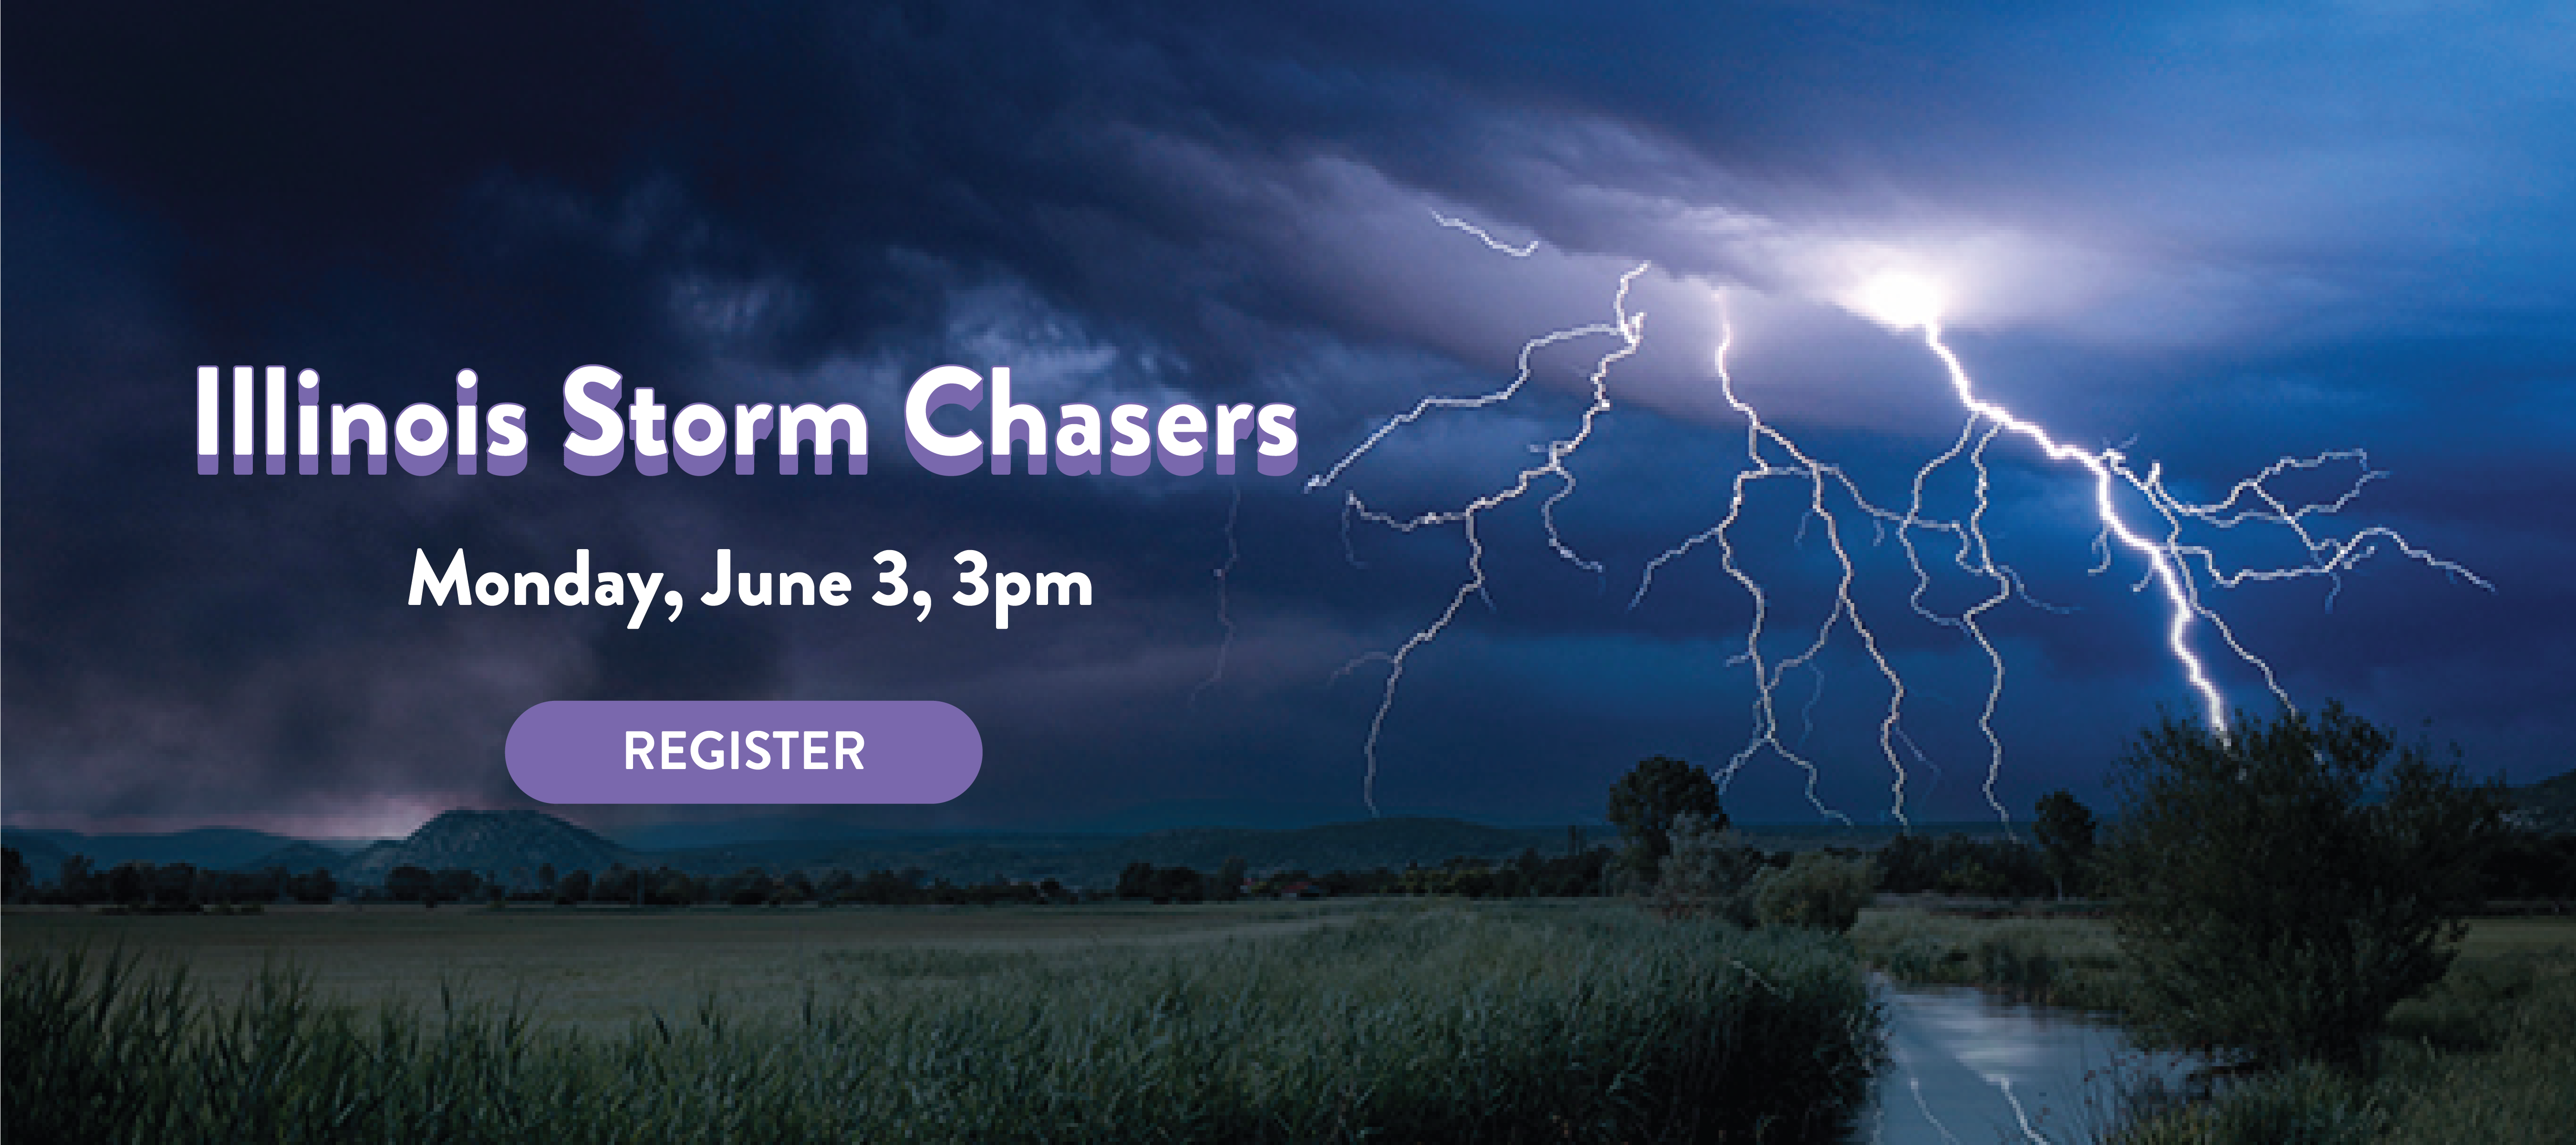 phpl, Prospect Heights Public Library, Illinois Storm Chasers, extreme weather, storm chasing, live demonstration, air mass, tornadoes, learn about weather, Youth, Family